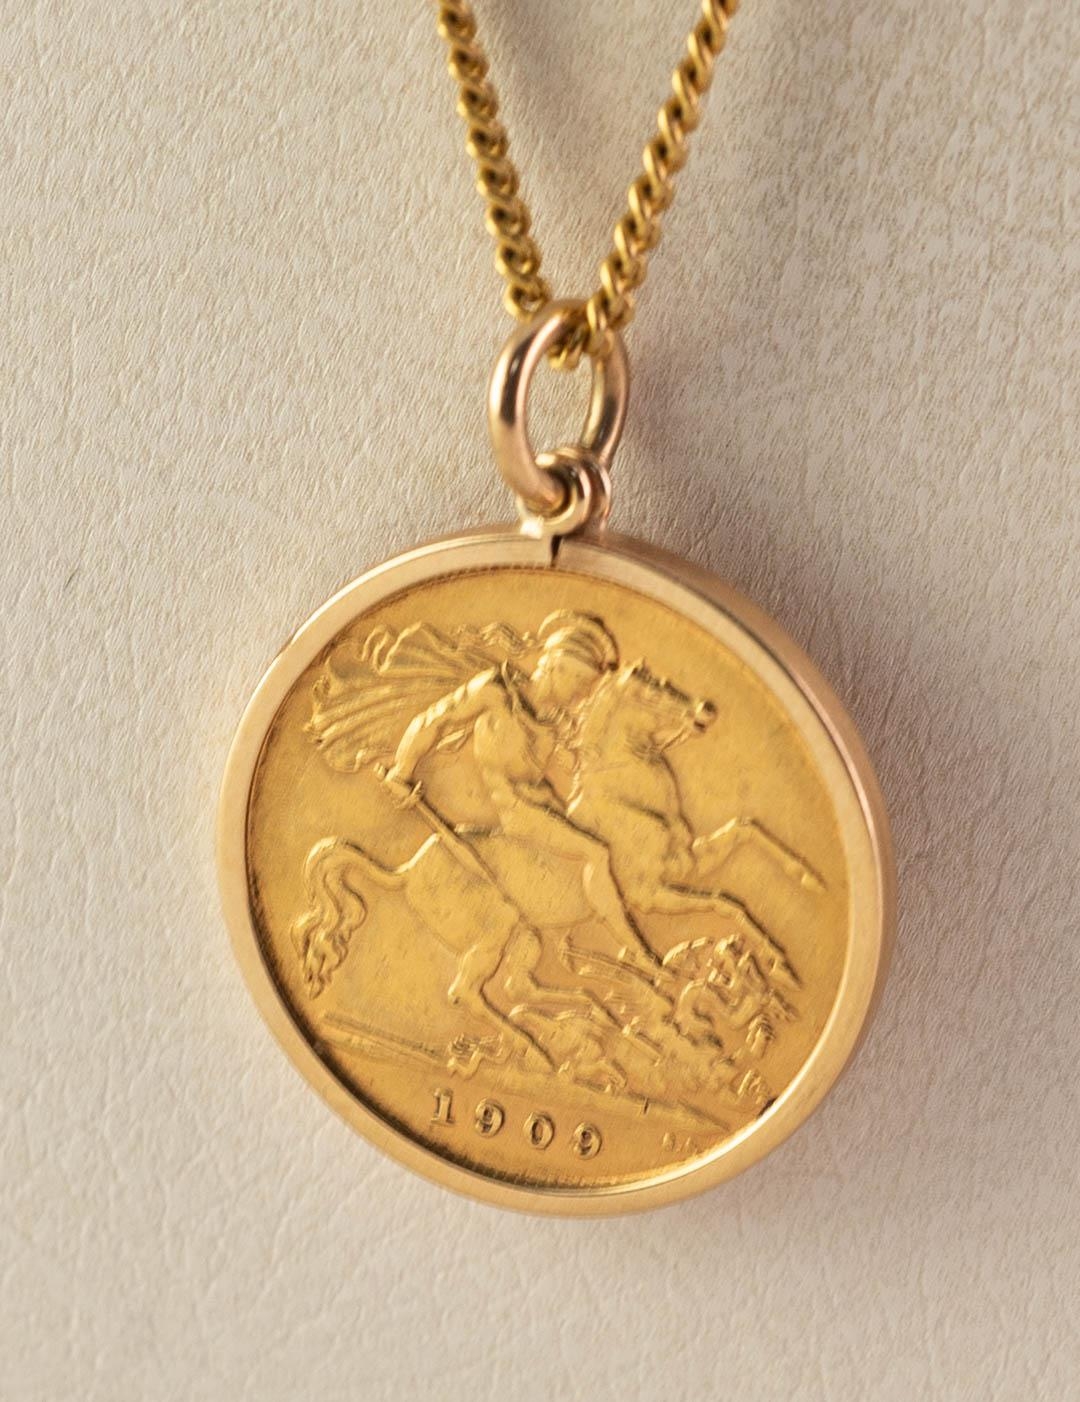 EDWARD VII 1909 GOLD HALF SOVEREIGN, loose framed as a pendant and the 9ct GOLD FINE CHAIN NECKLACE, - Image 2 of 3